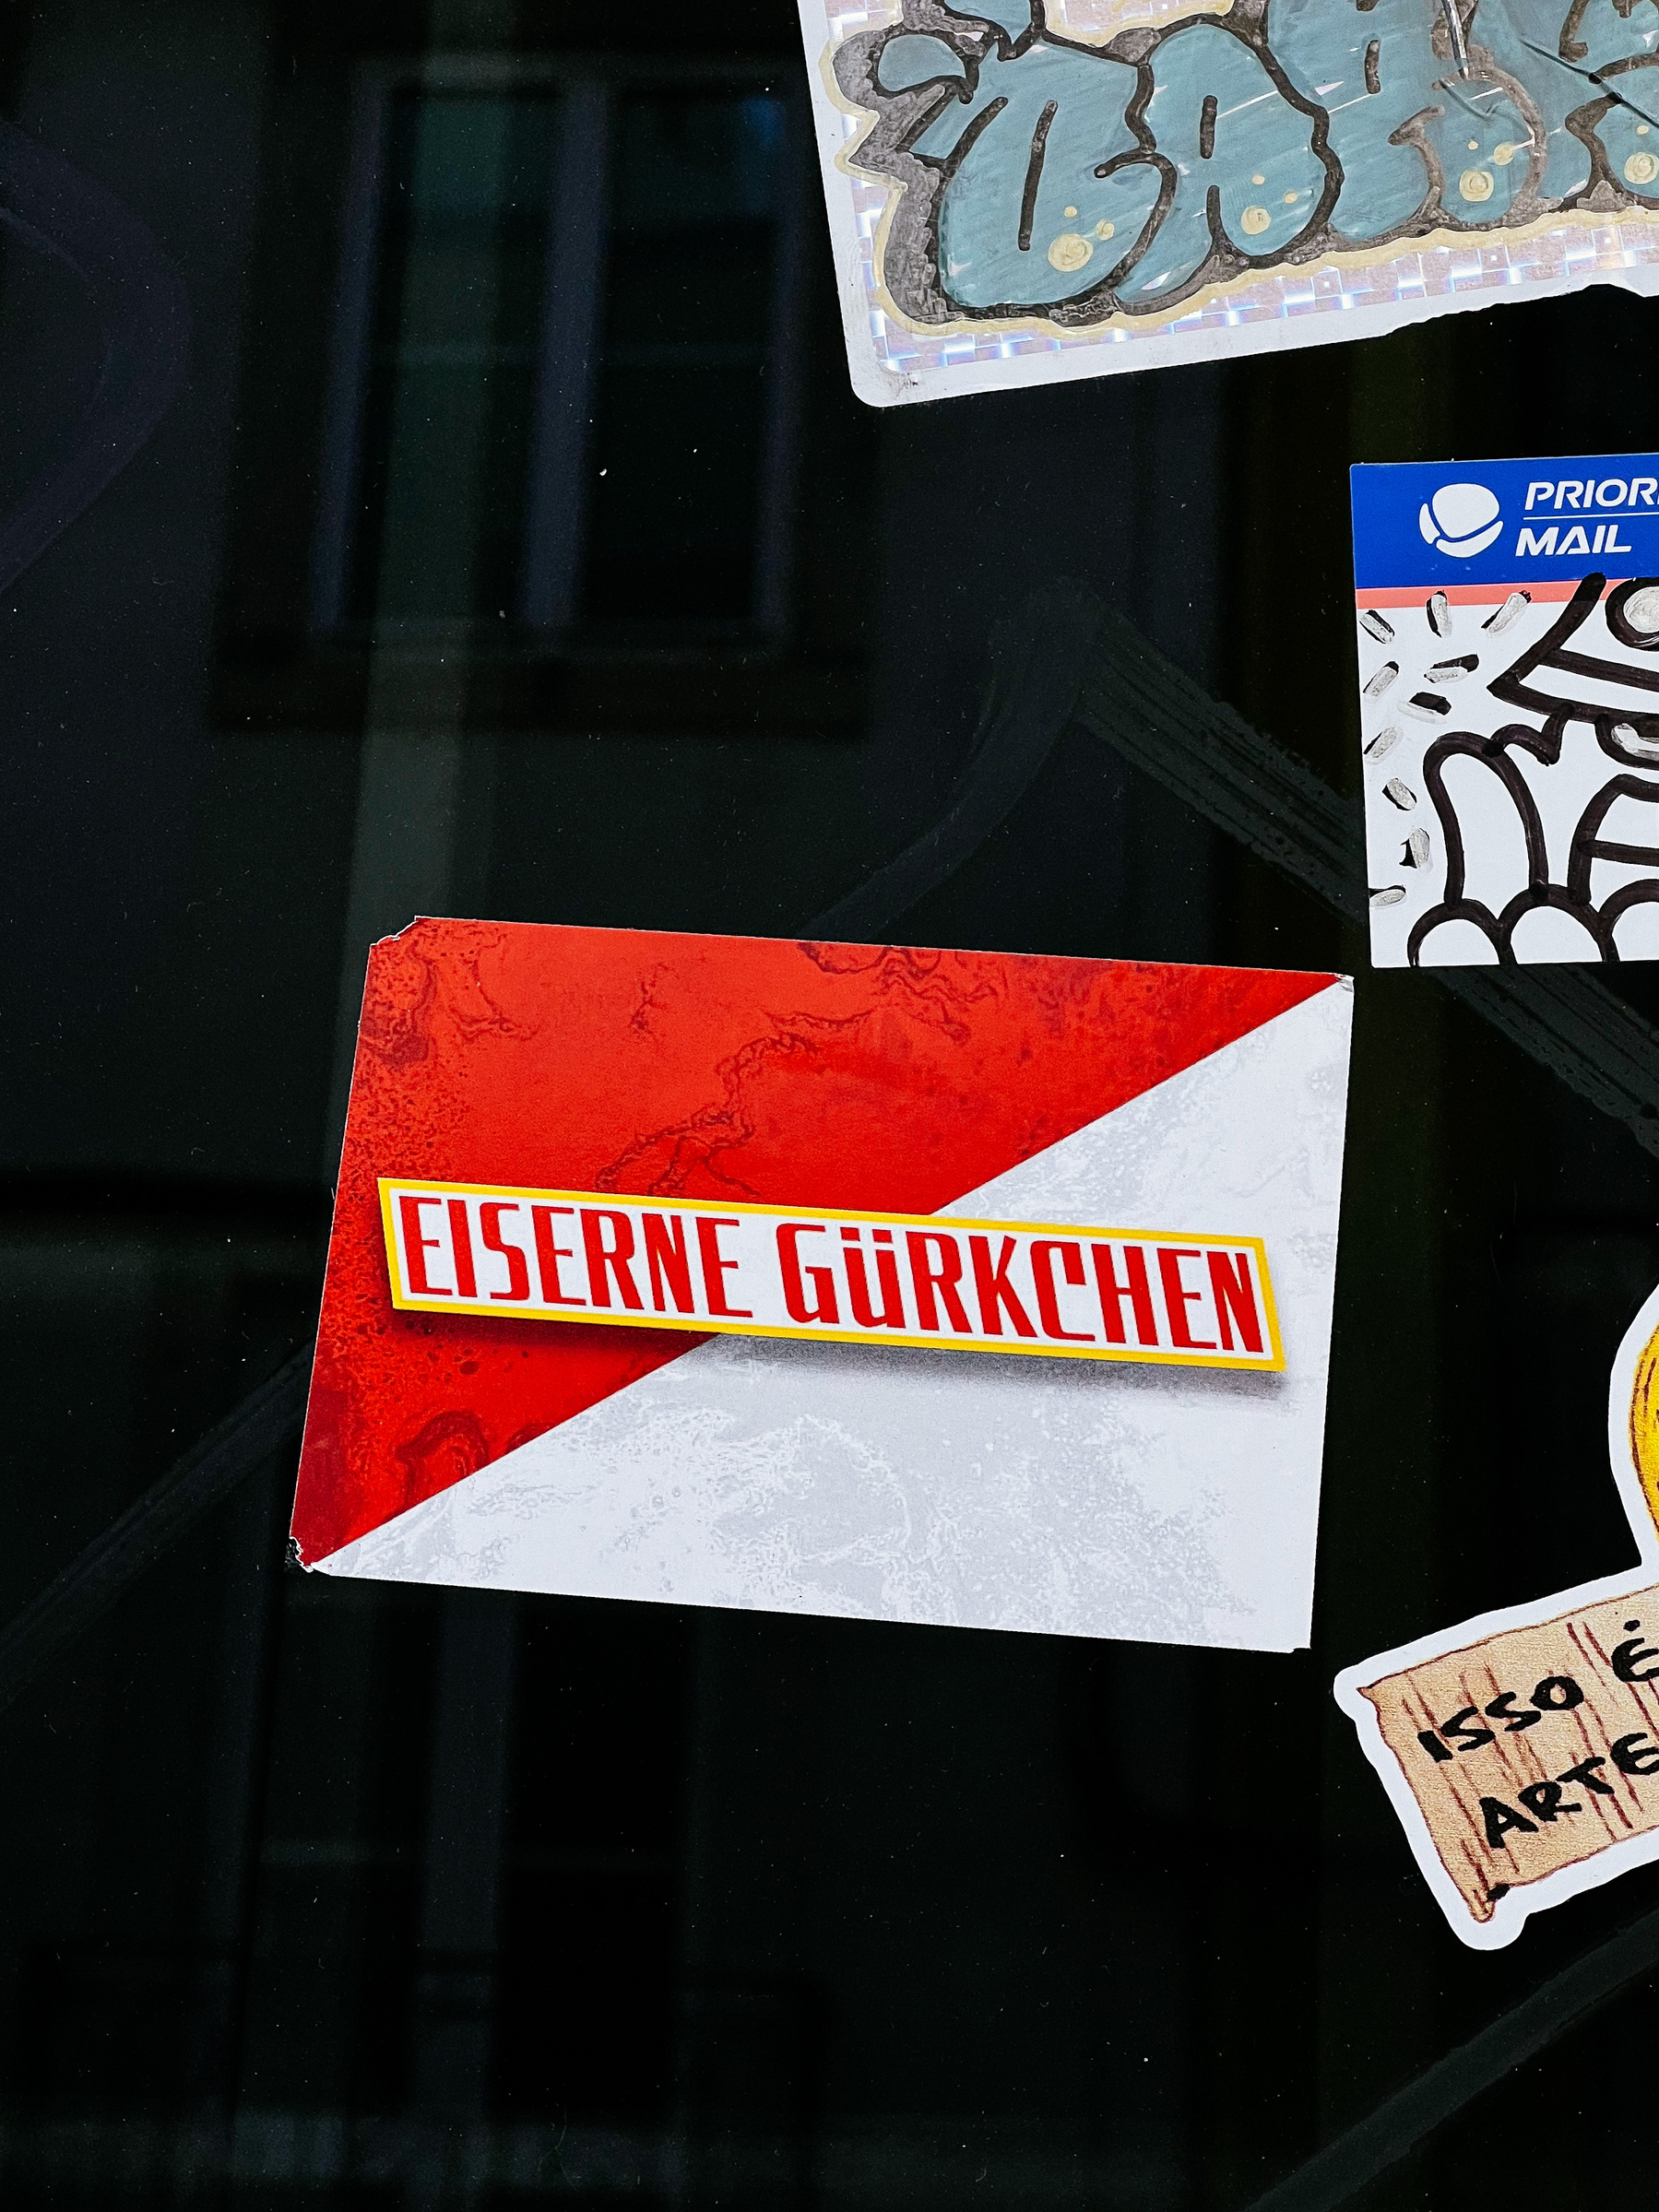 Sticker with what looks like a scuba flag (red and white), and the words “EISERNE GÜRKCHEN” written on top. 